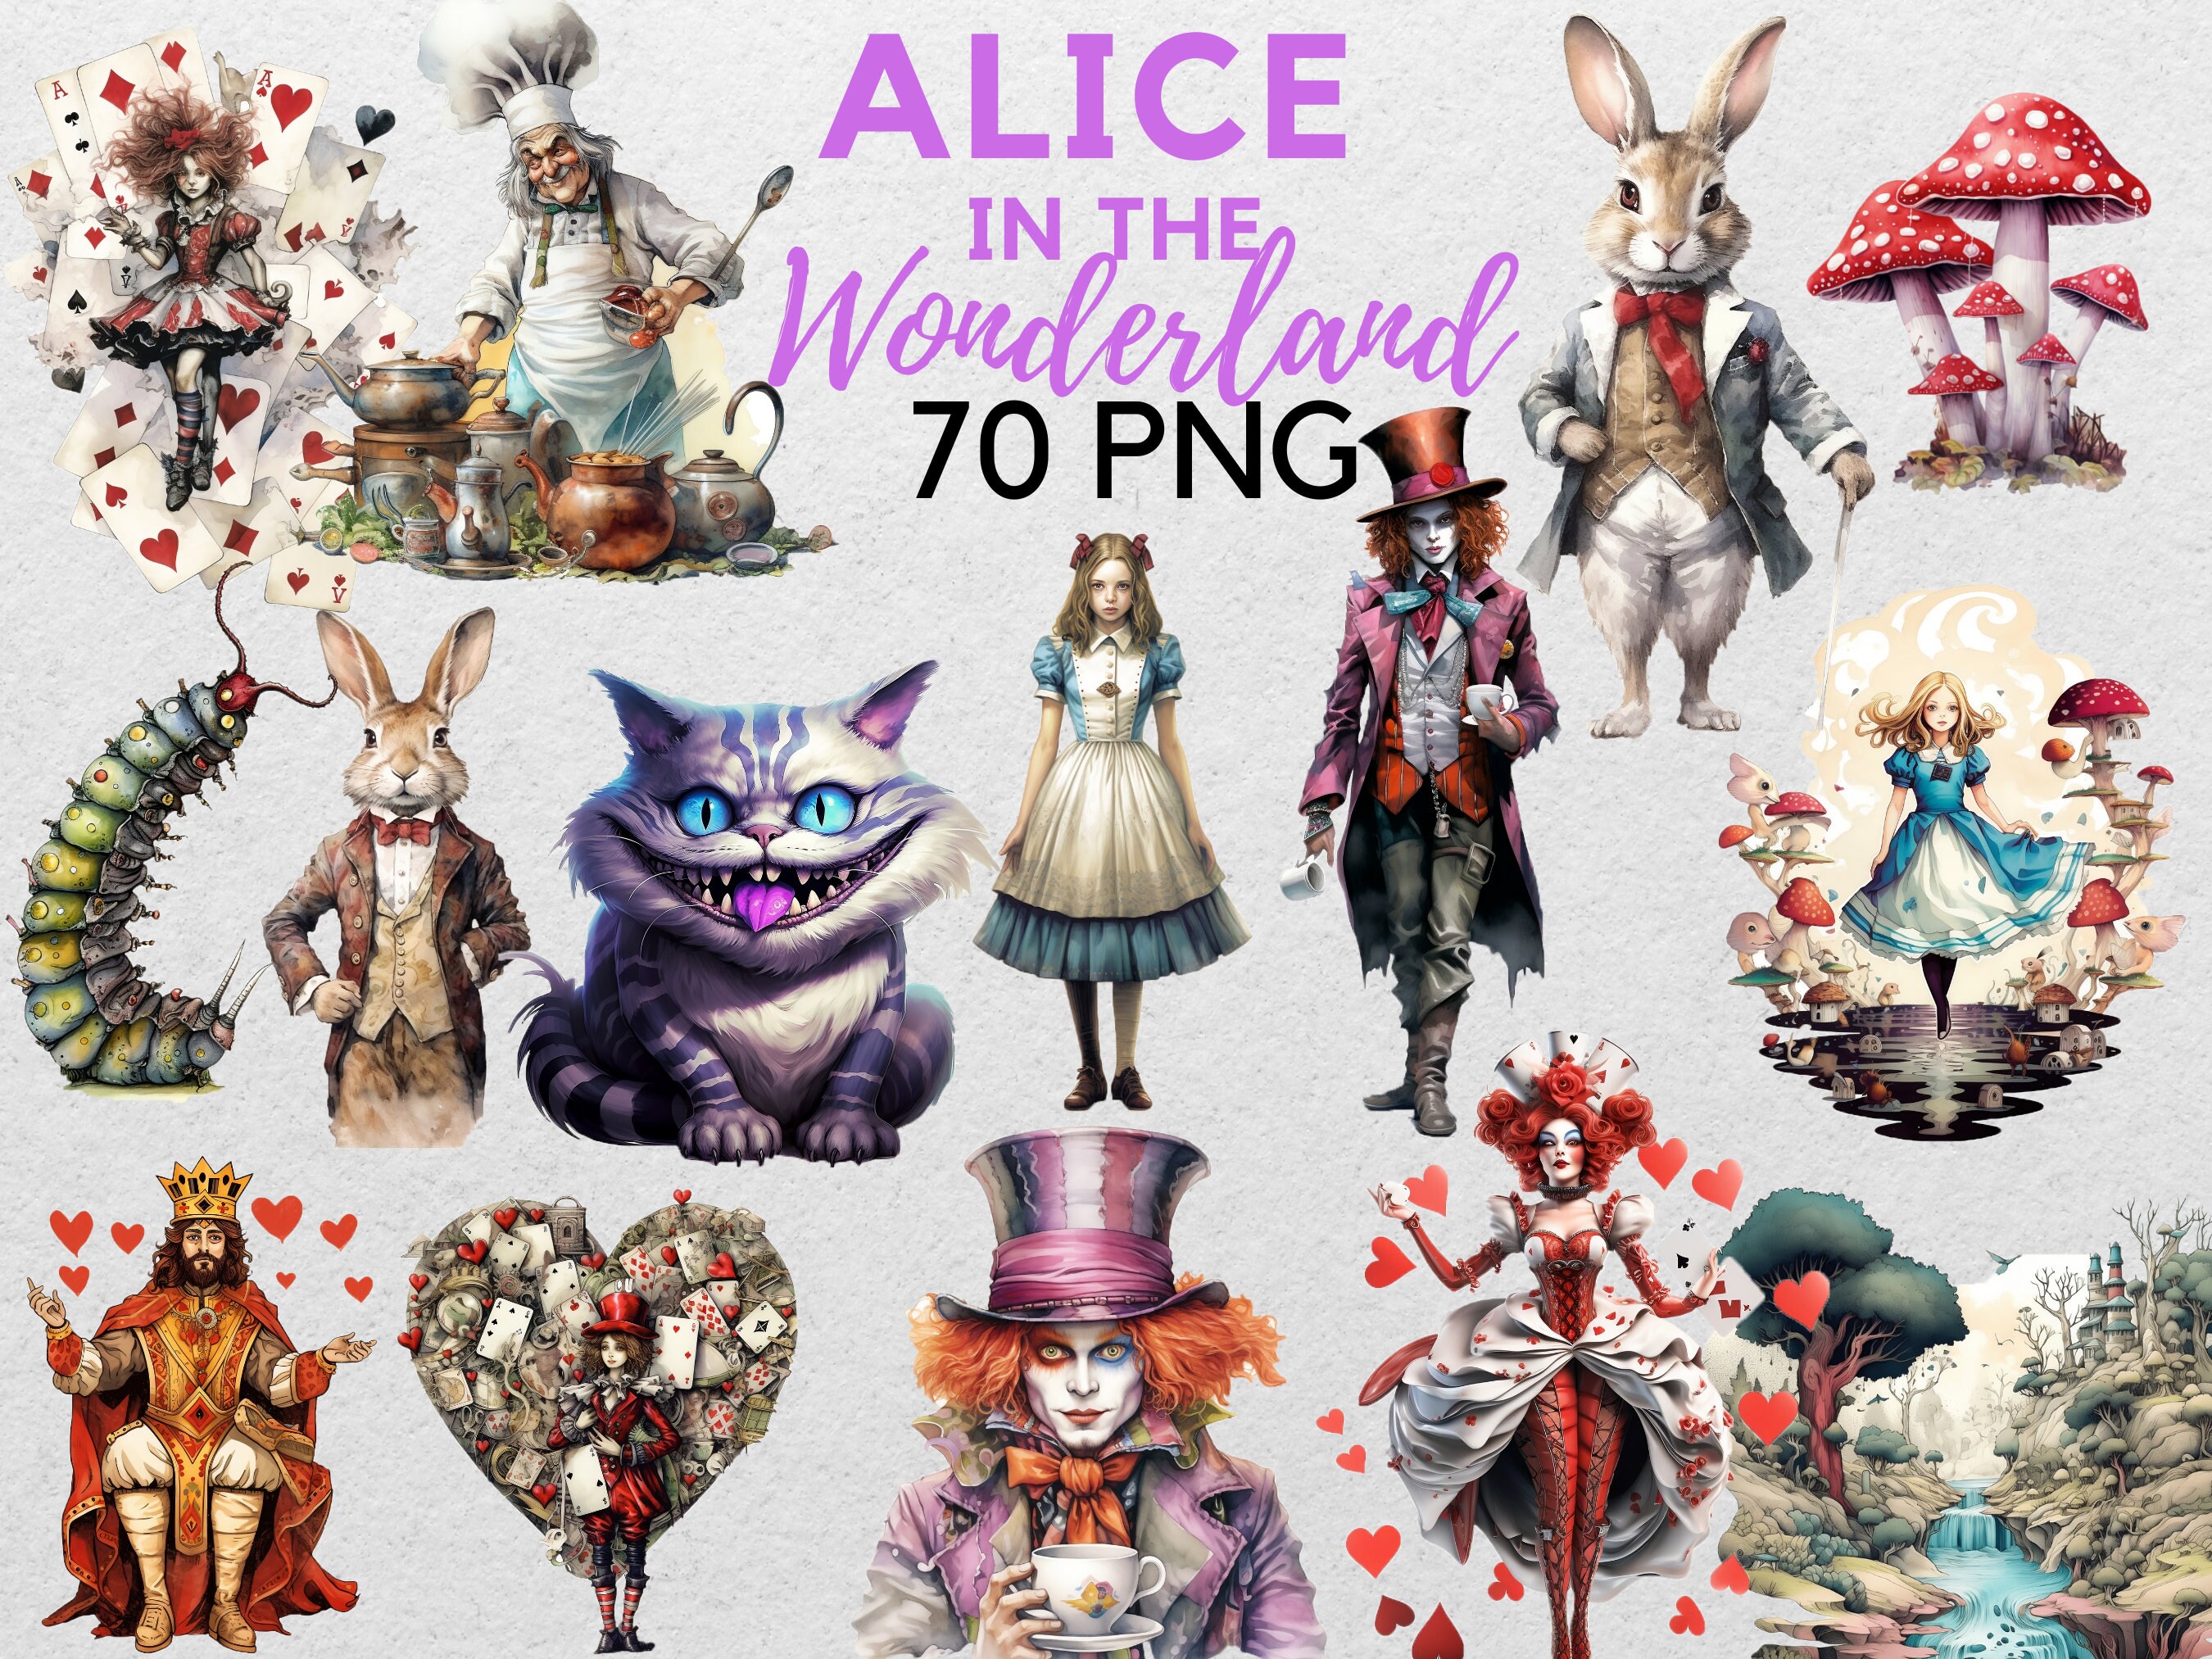 Alice in Wonderland - Plugged In